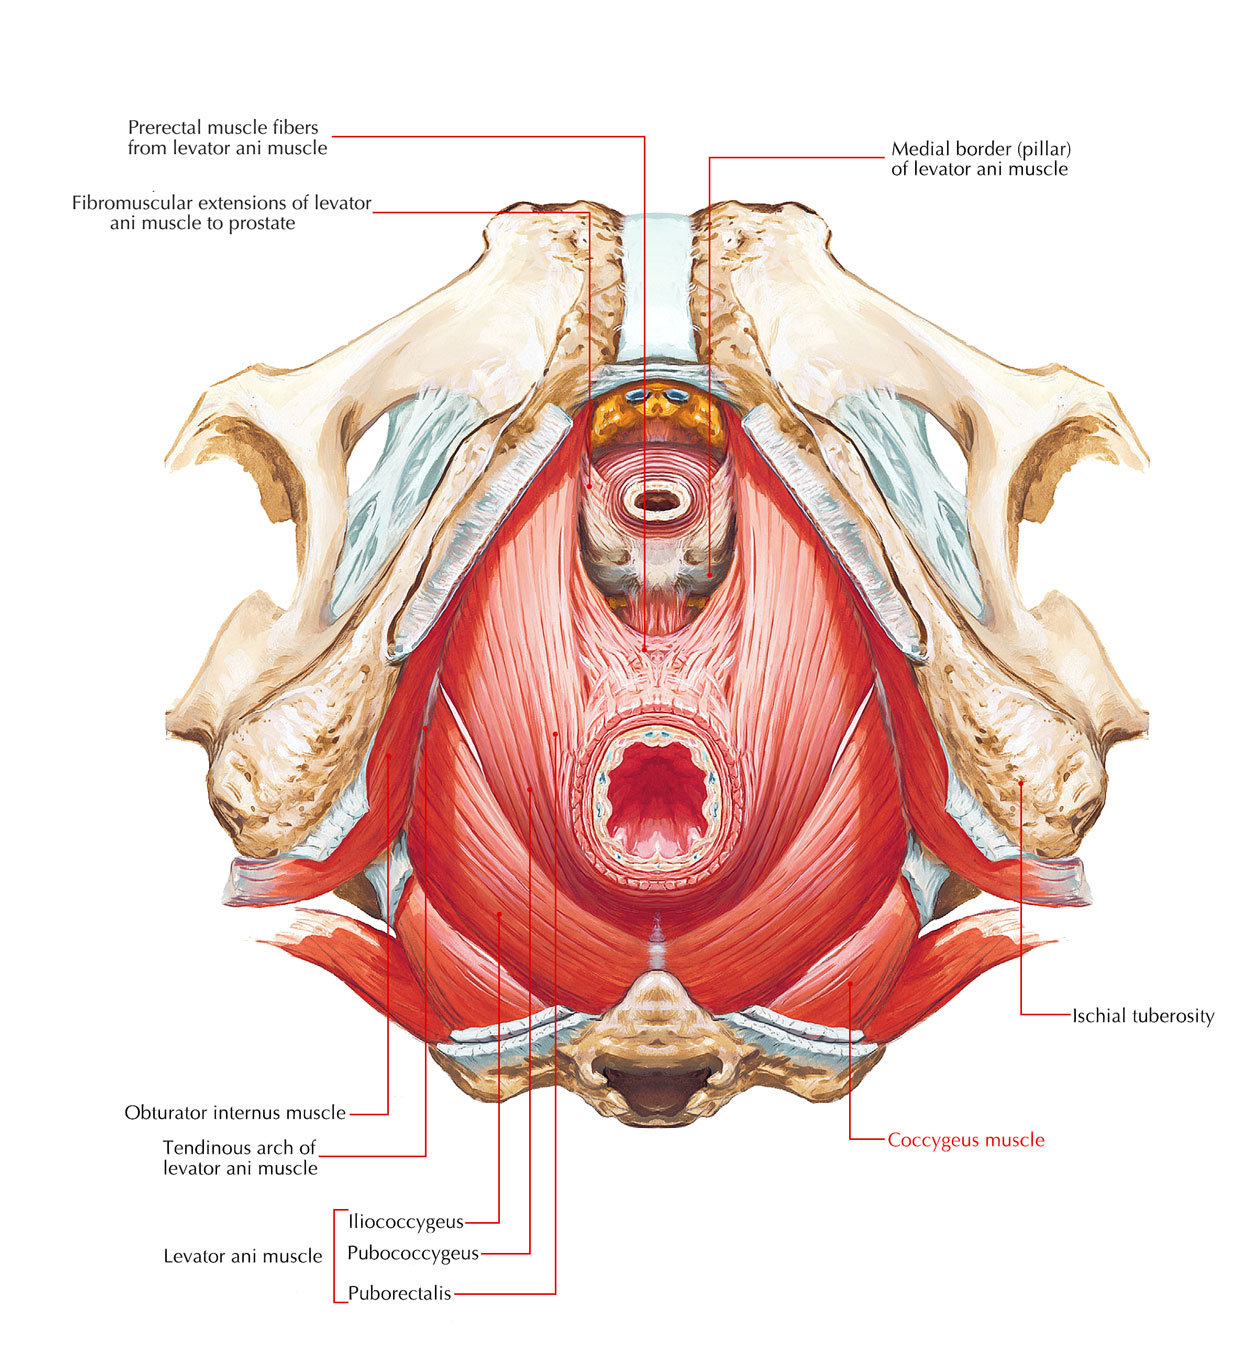 Muscles of the Pelvis: Coccygeus Muscle